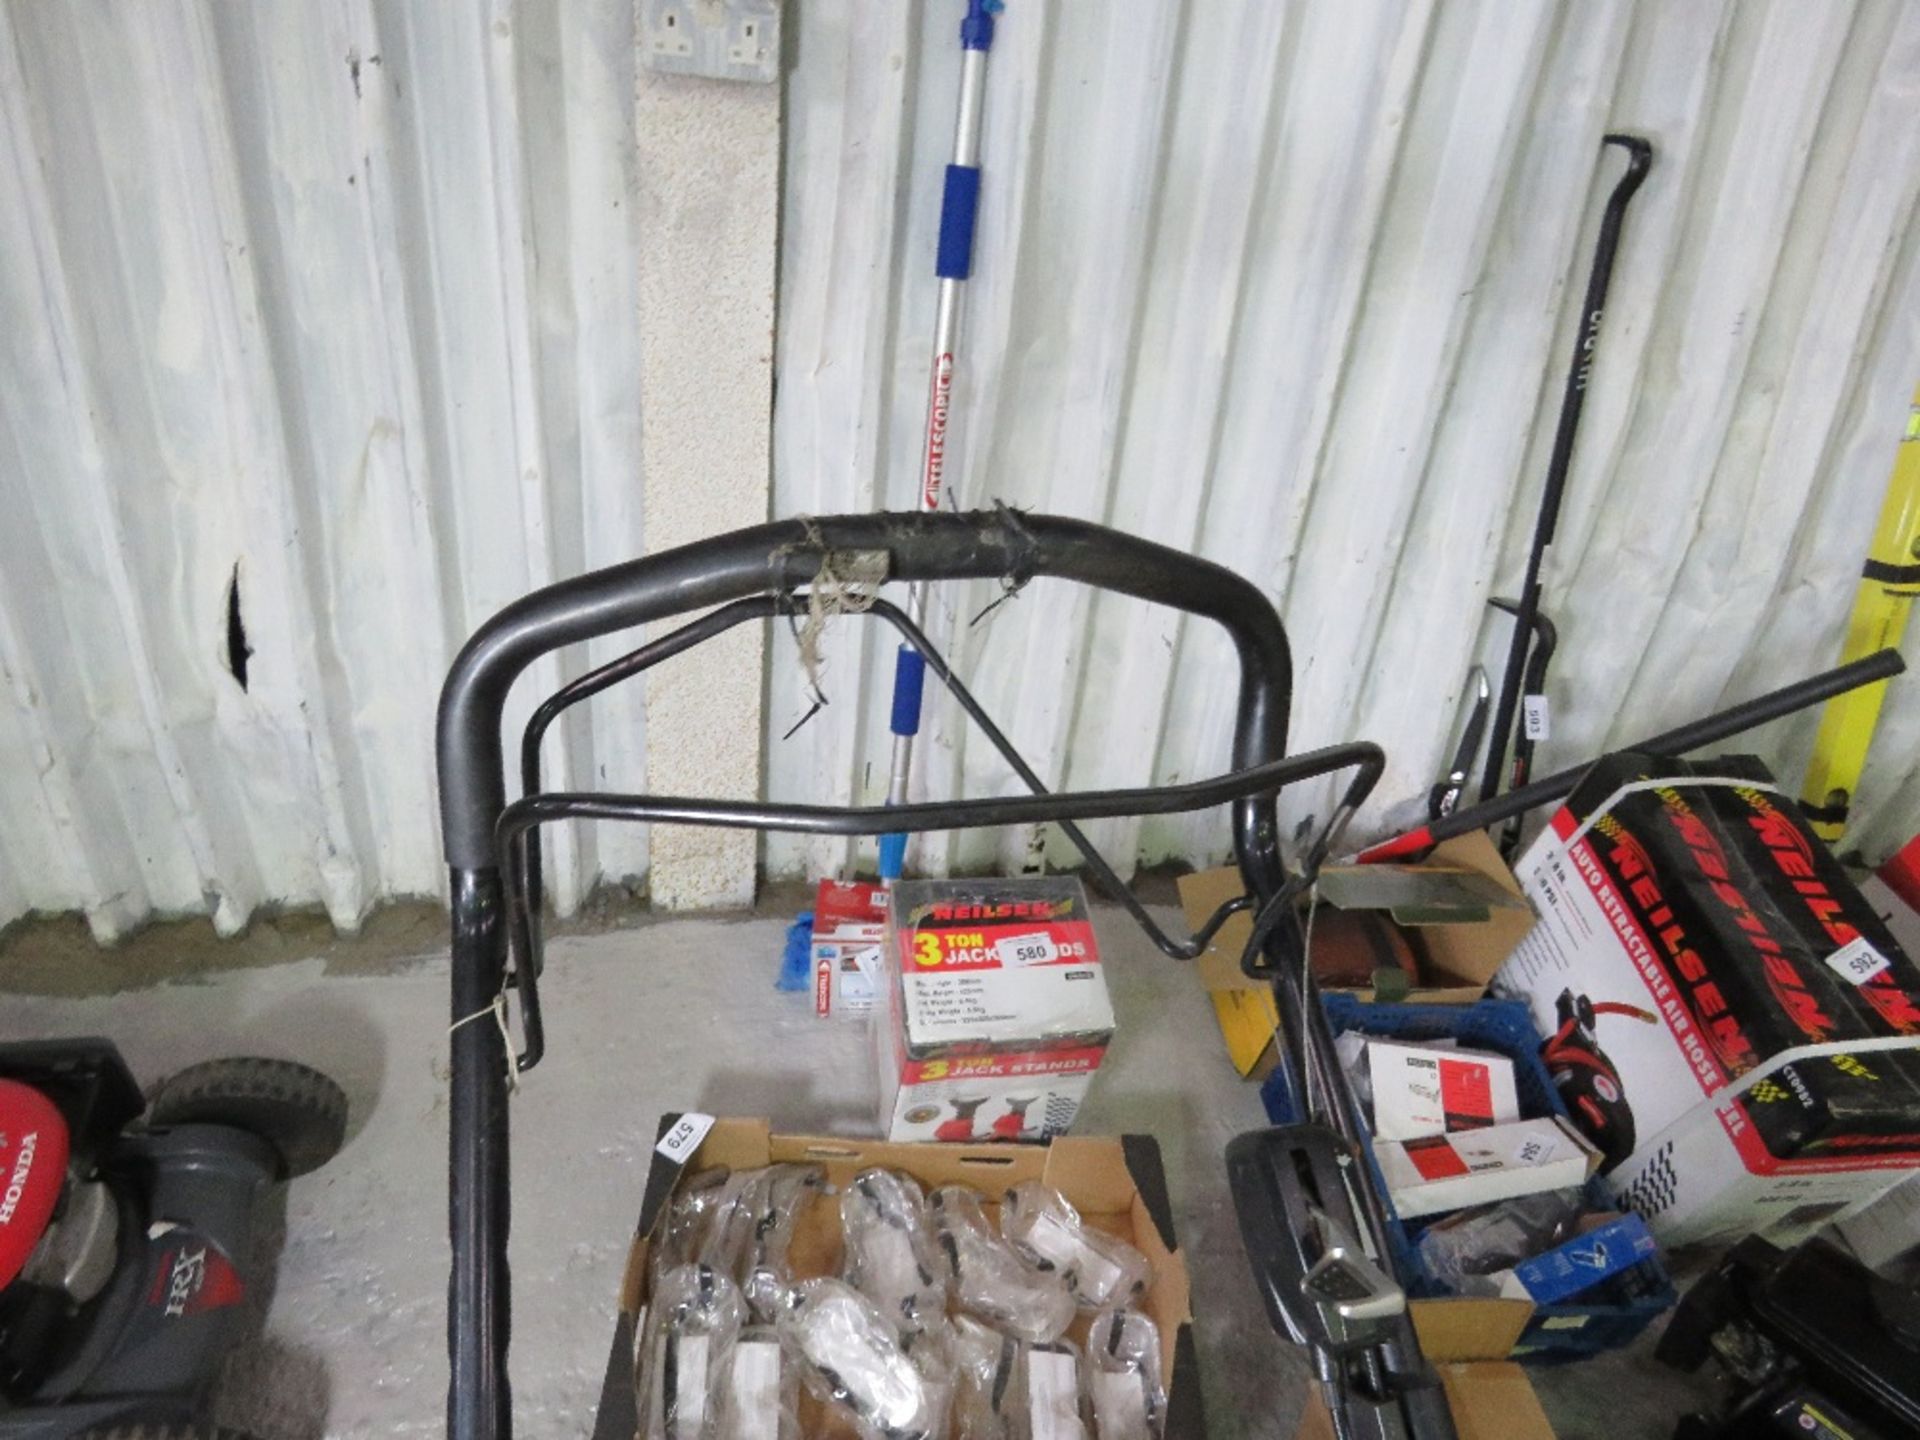 ATCO ROLLER MOWER WITH A COLLECTOR. WHEN TESTED WAS SEEN TO RUN. THIS LOT IS SOLD UNDER THE AUCTION - Image 2 of 5